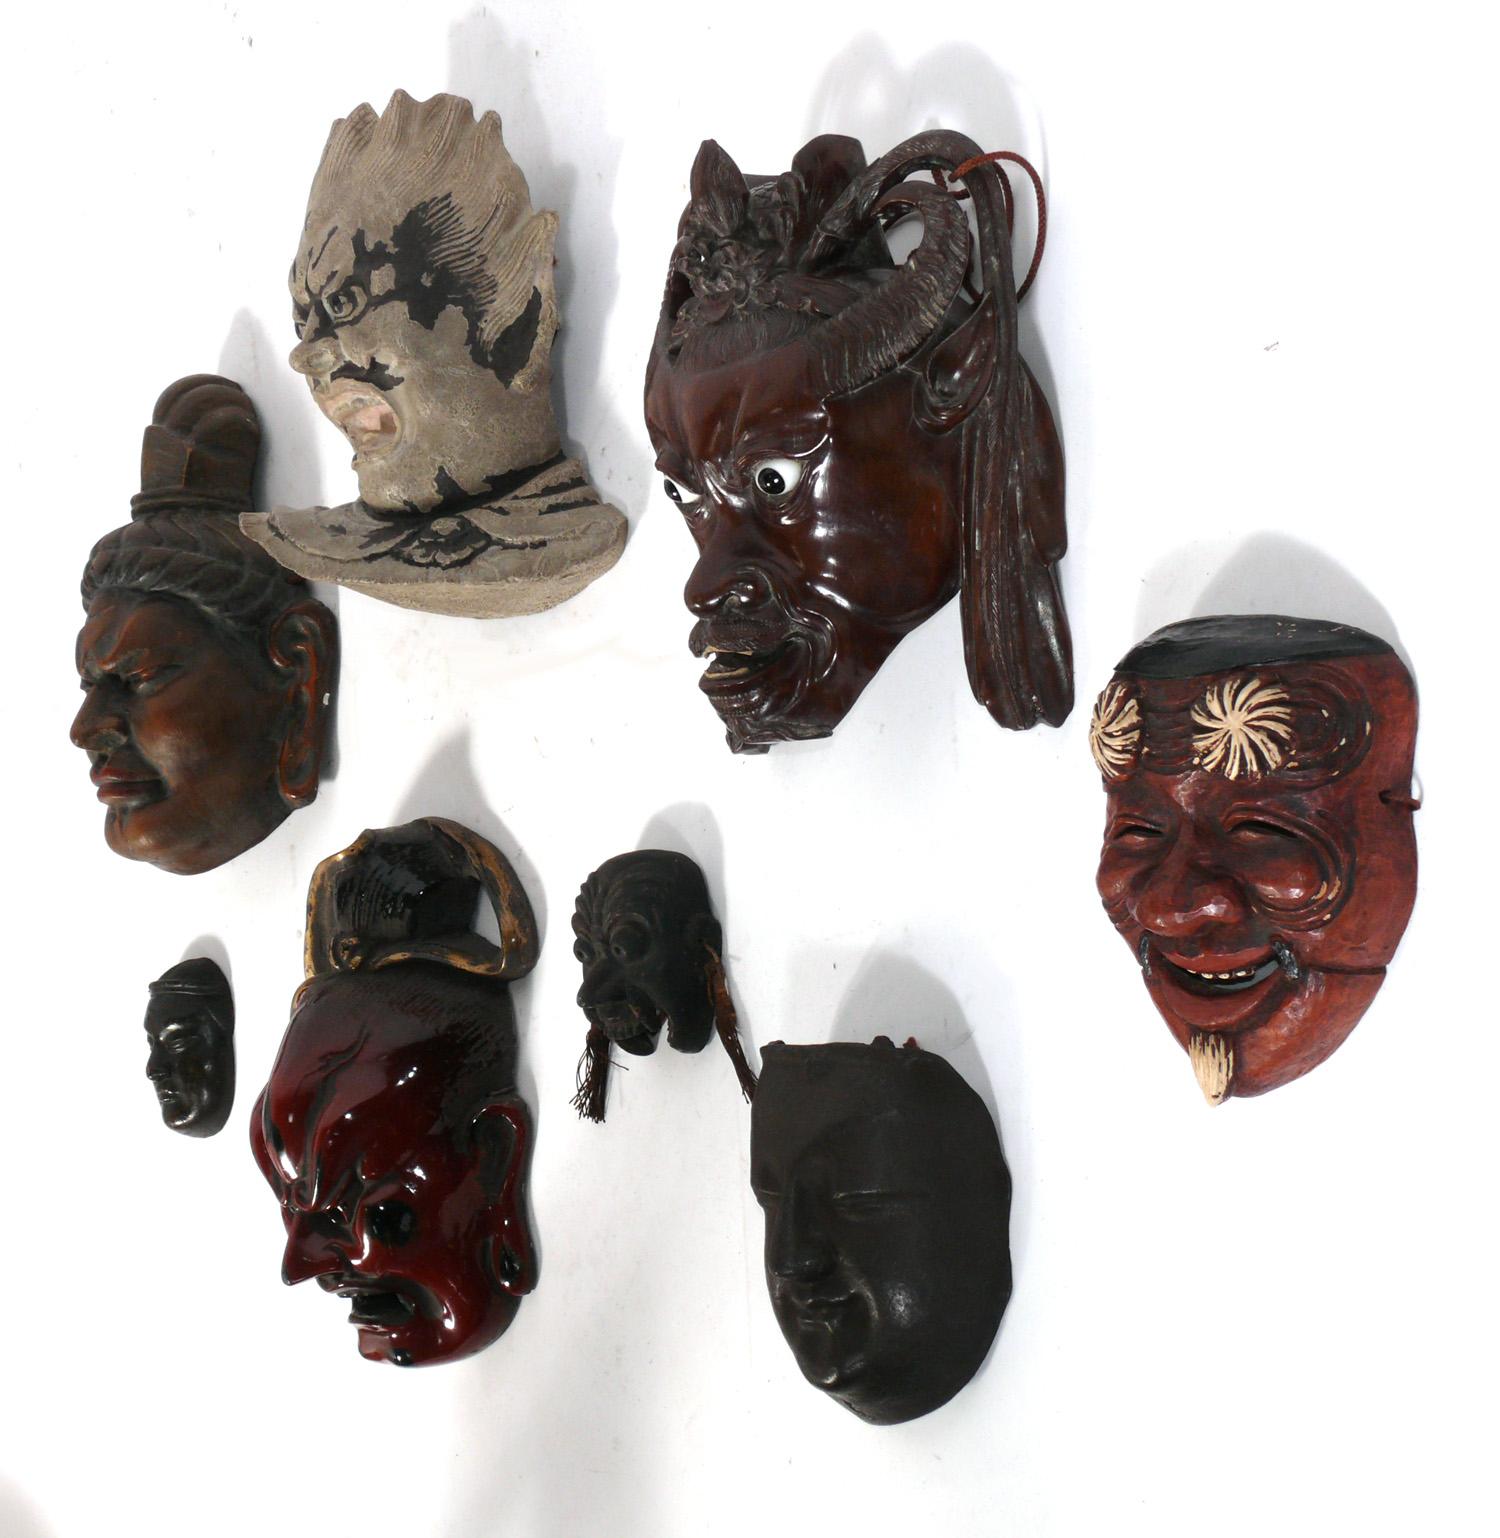 Collection of eight Japanese and Chinese masks, circa 1950s or earlier. These were recently purchased from the Manhattan estate of a Japanese man who traveled to Asia in the 1940s-1970s purchasing antiques. They retain their warm original patina.